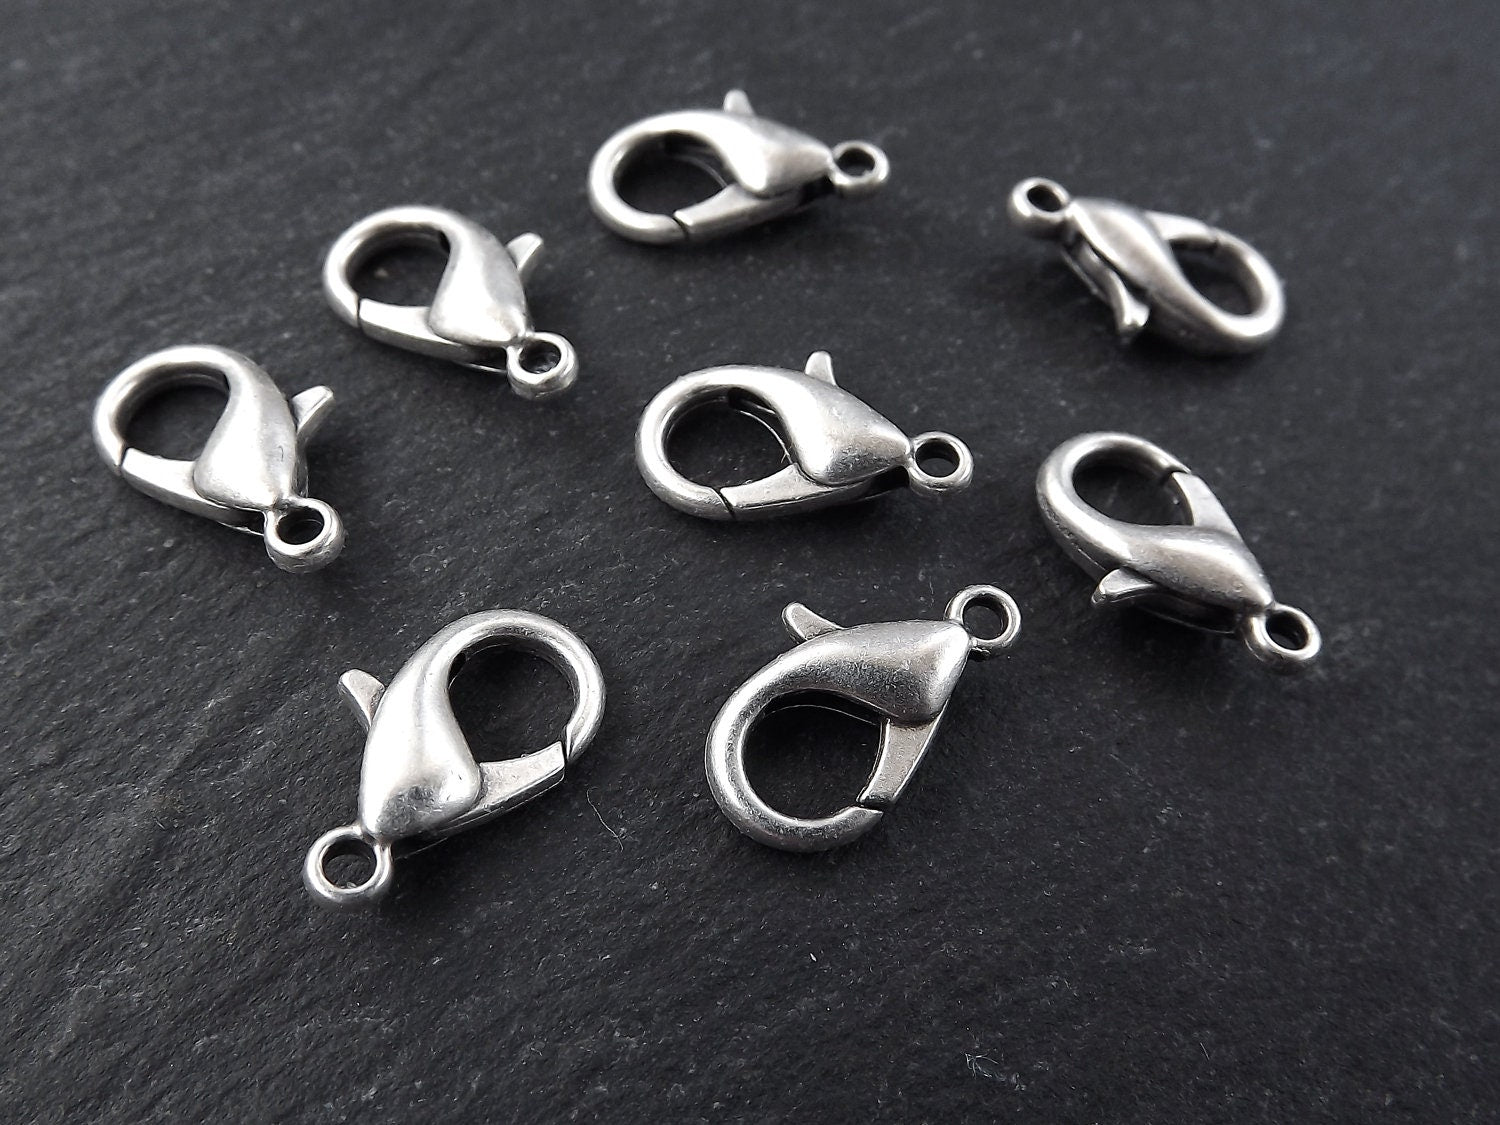 Silver Lobster Clasp, Silver Lobster Claw, Silver Parrot Clasps, 15mm x 8mm, Closure, Antique Matte Silver Plated, Medium, NEW SIZE, 8pc